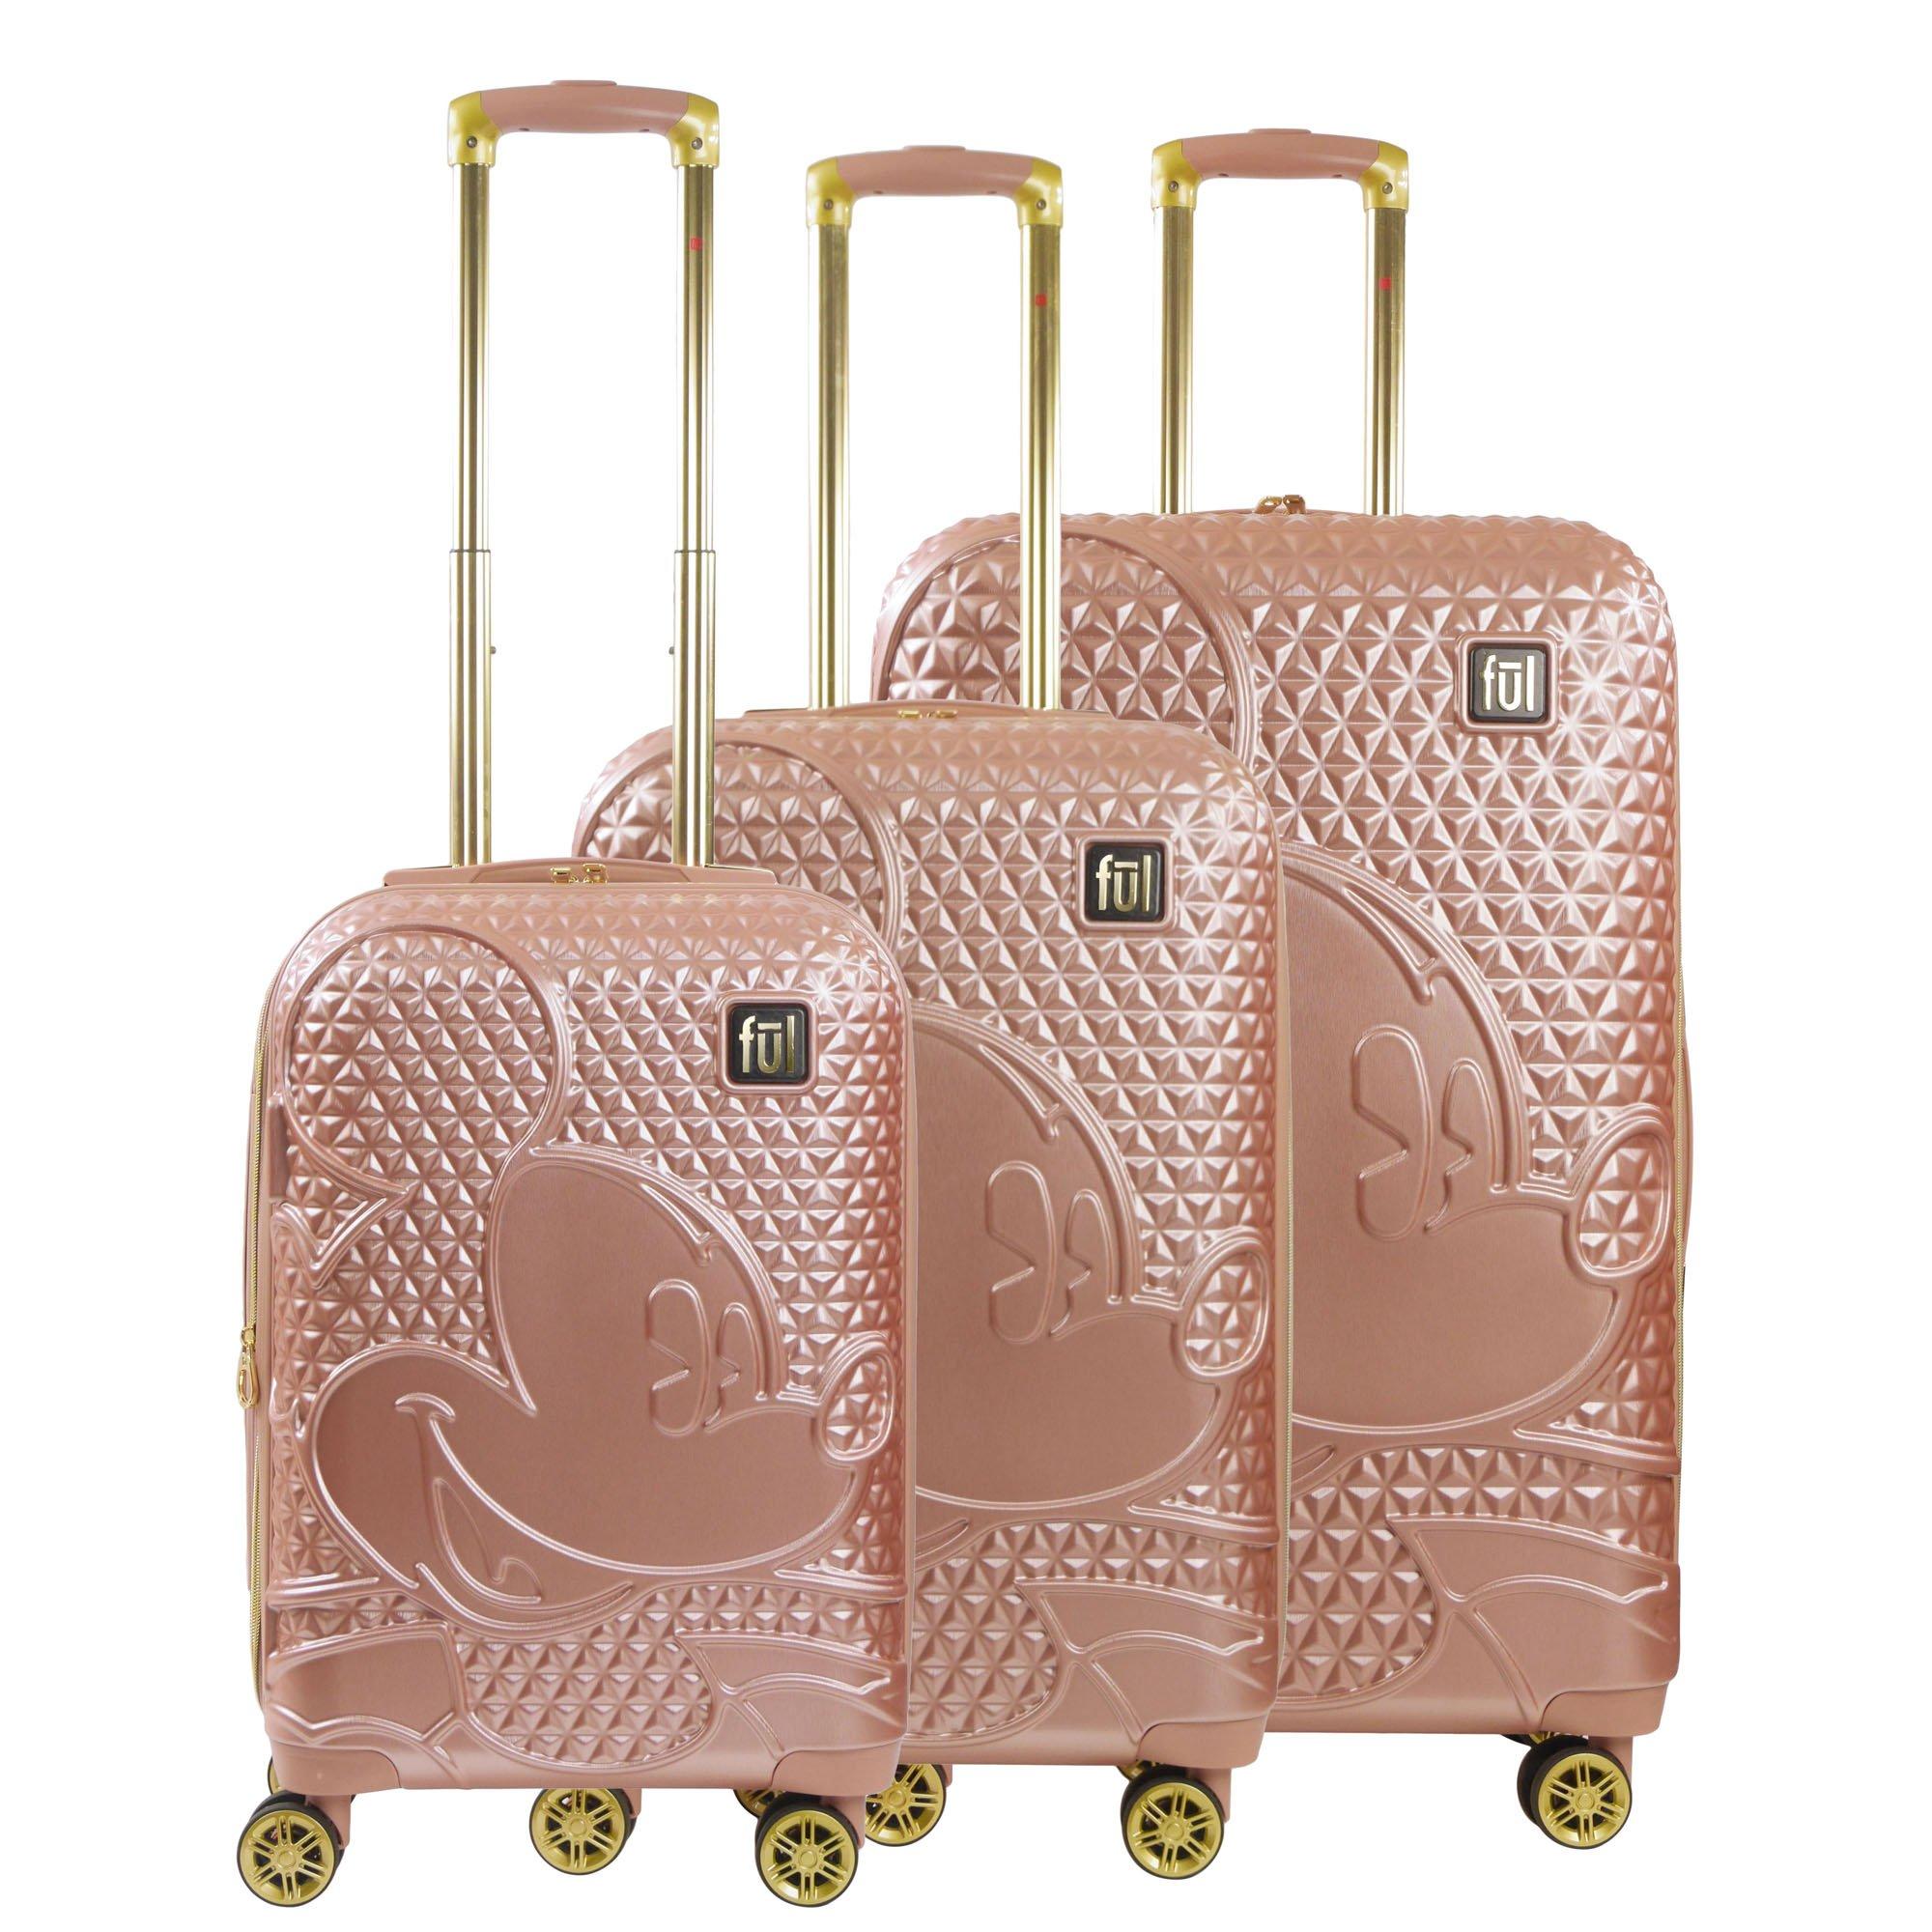 FUL Disney Textured Mickey Mouse Hard Sided Luggage 3-Piece Set - Rose Gold, Concept One, Rosegold